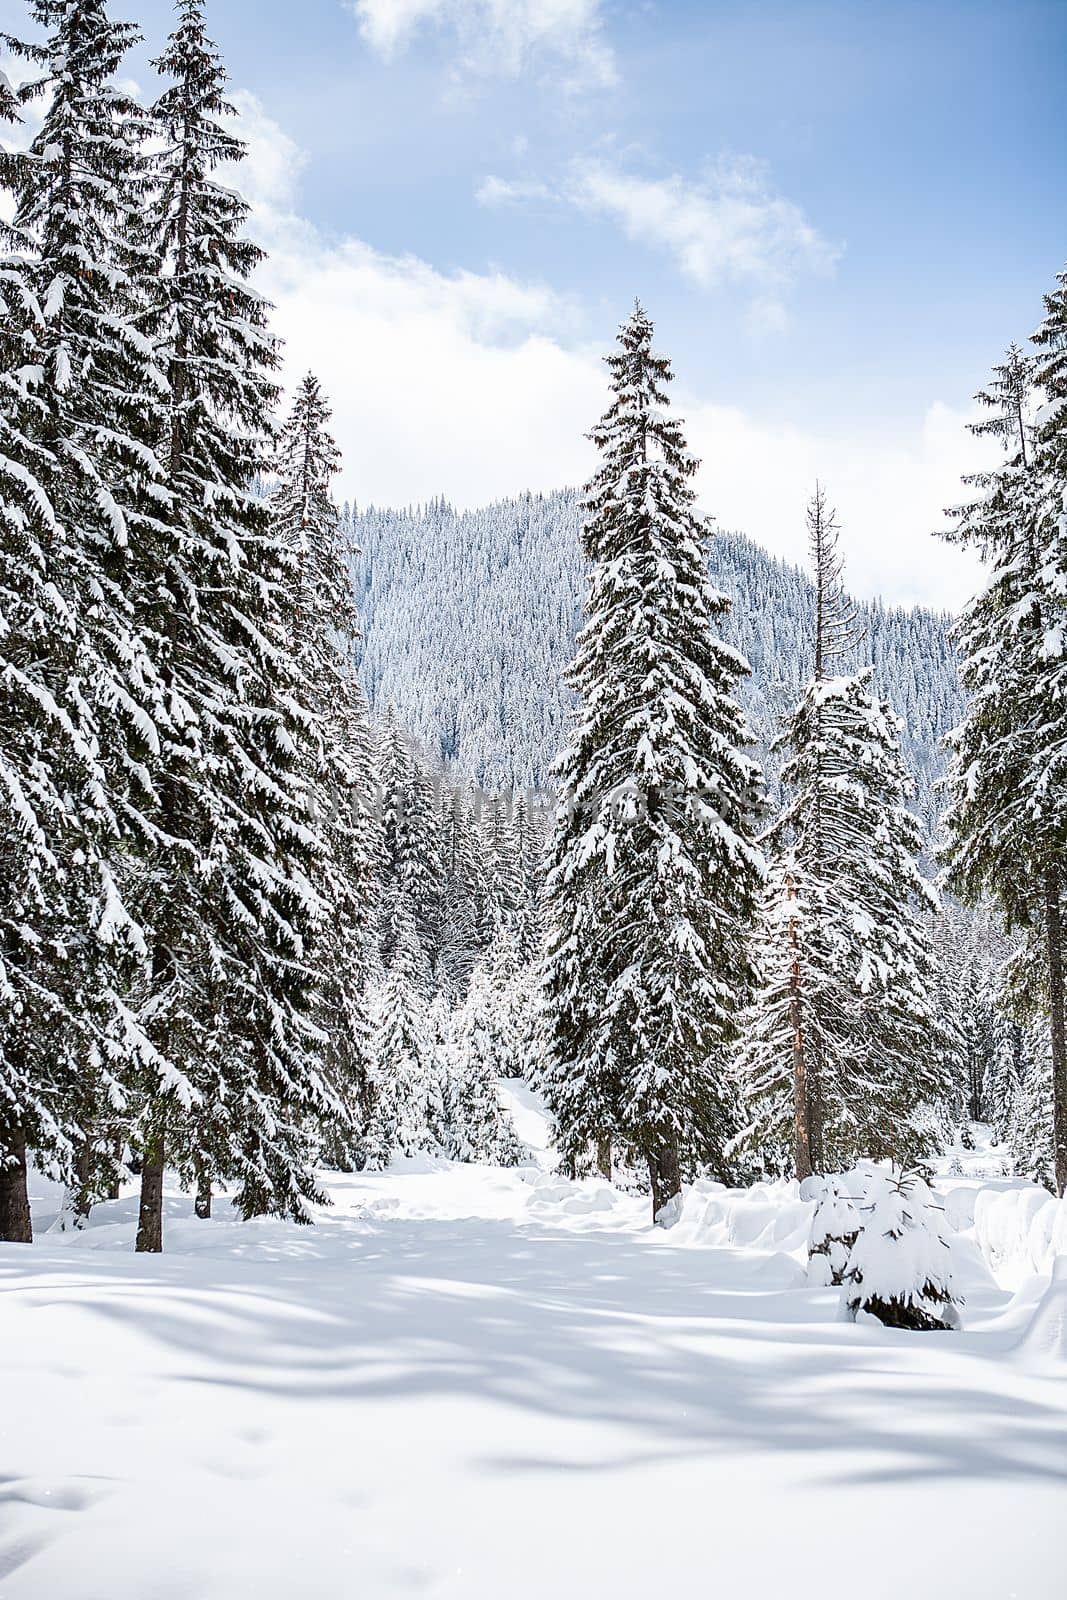 Beautiful winter landscape with trees unde heavy snow. Magical scenery